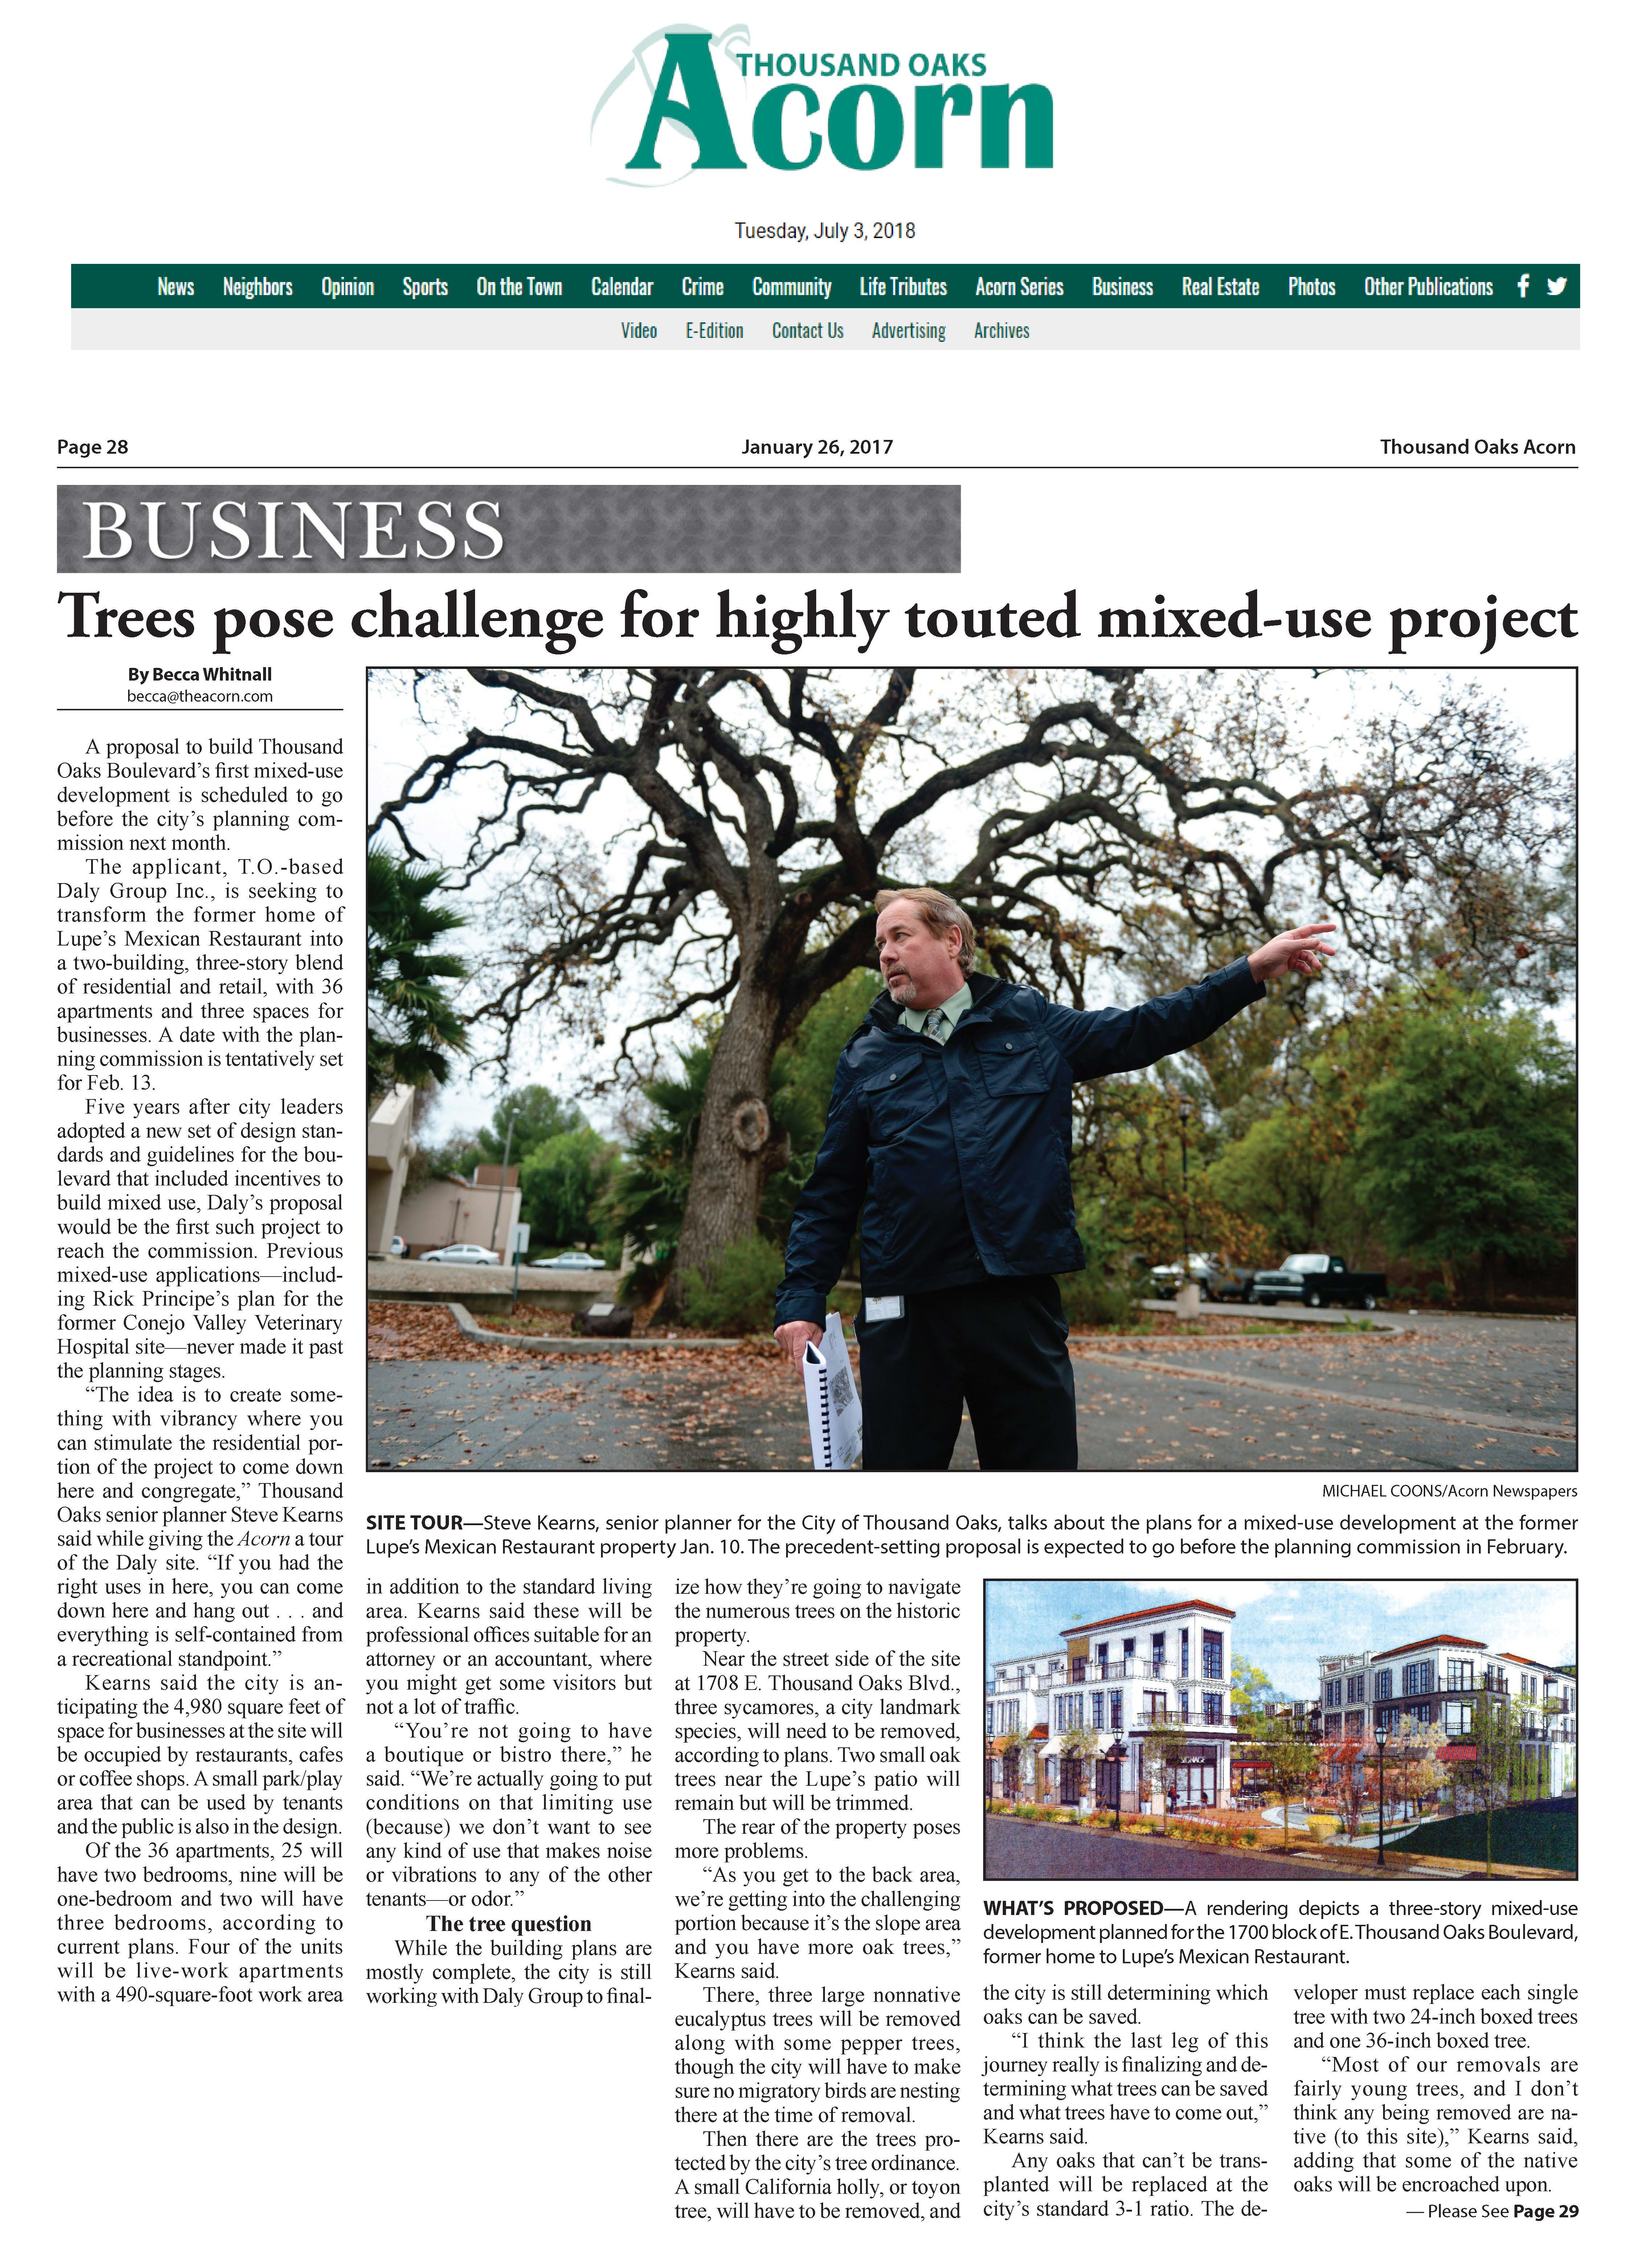 Thousand Oaks Acorn: Trees pose challenge for highly touted mixed-use project